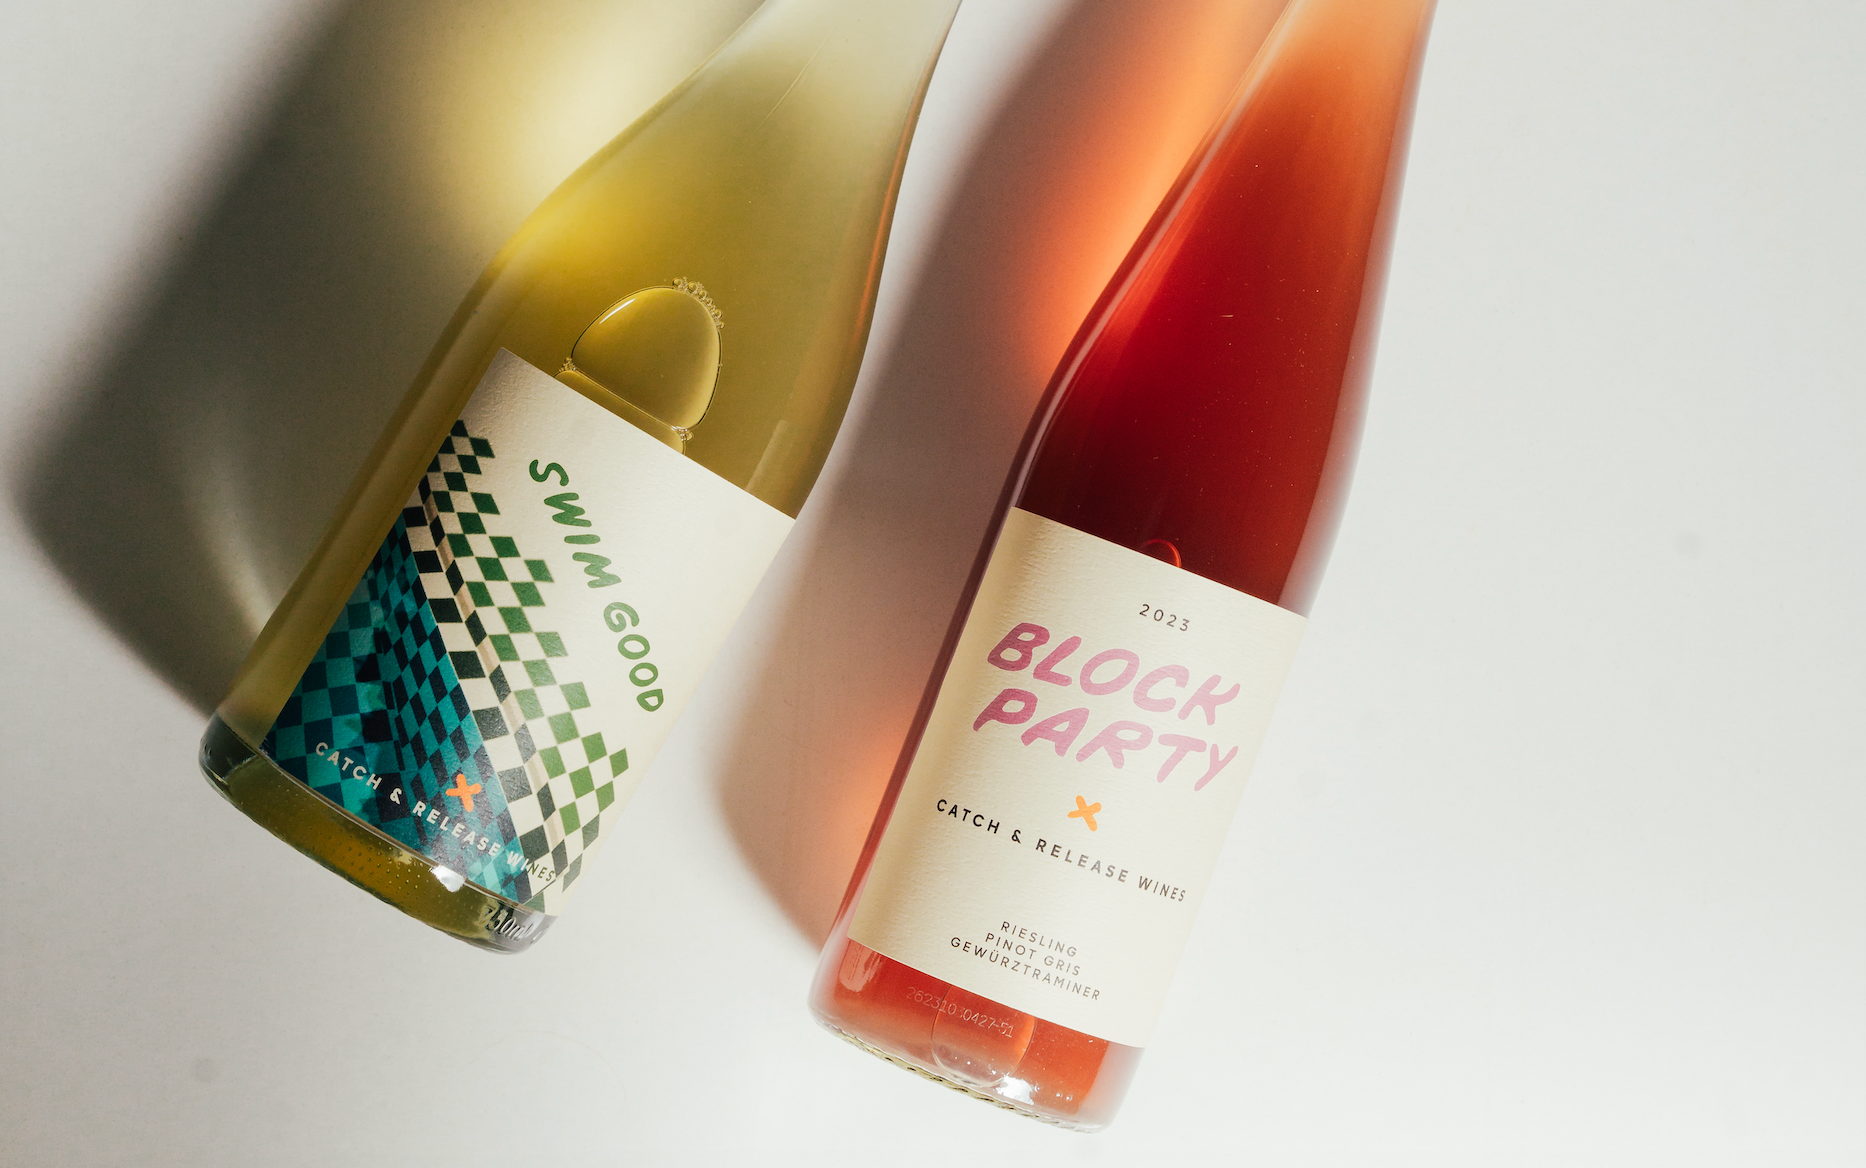 Catch & Release Wines Block Party Orange wine of Riesling, Pinot Gris, and Gewürztraminer, and Swim Good, Pet Nat of Albariño. 